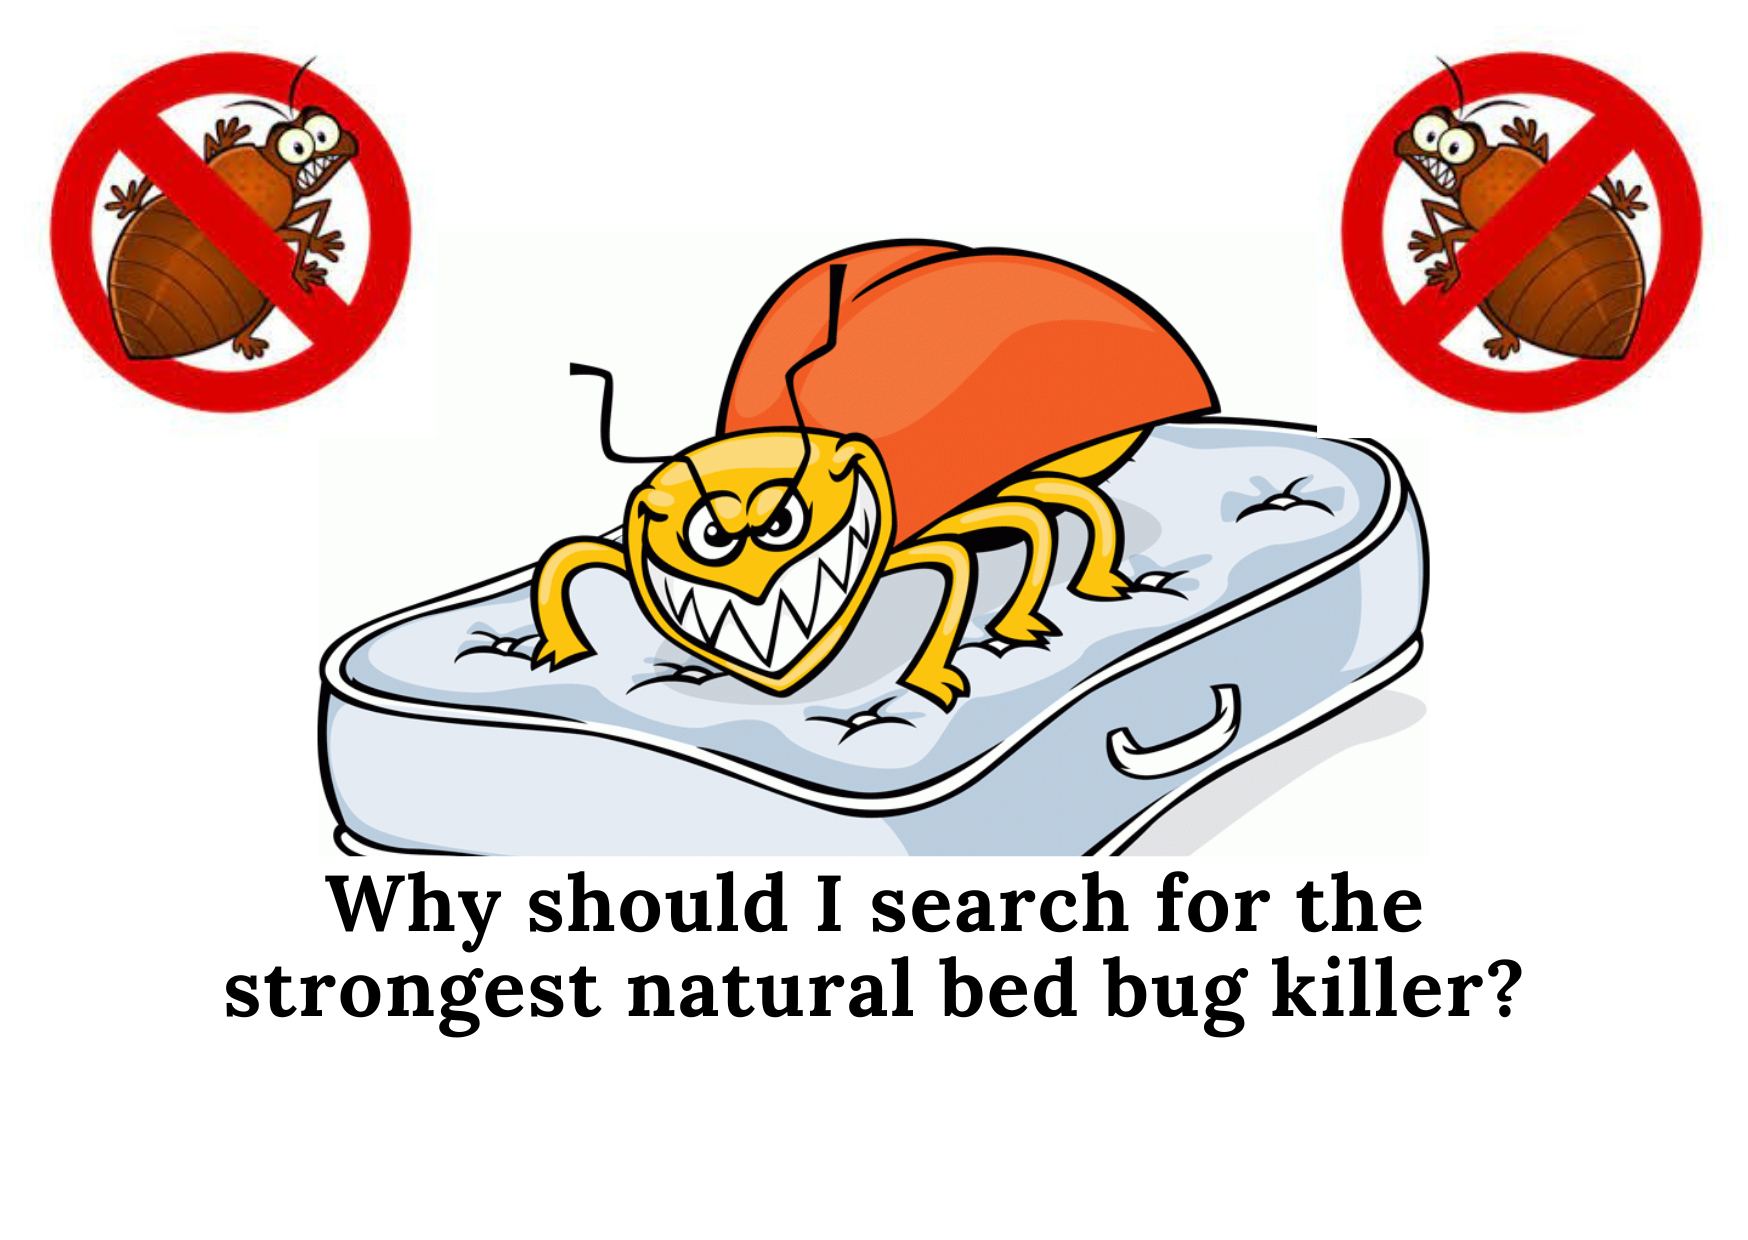 Why should I search for the strongest natural bed bug killer